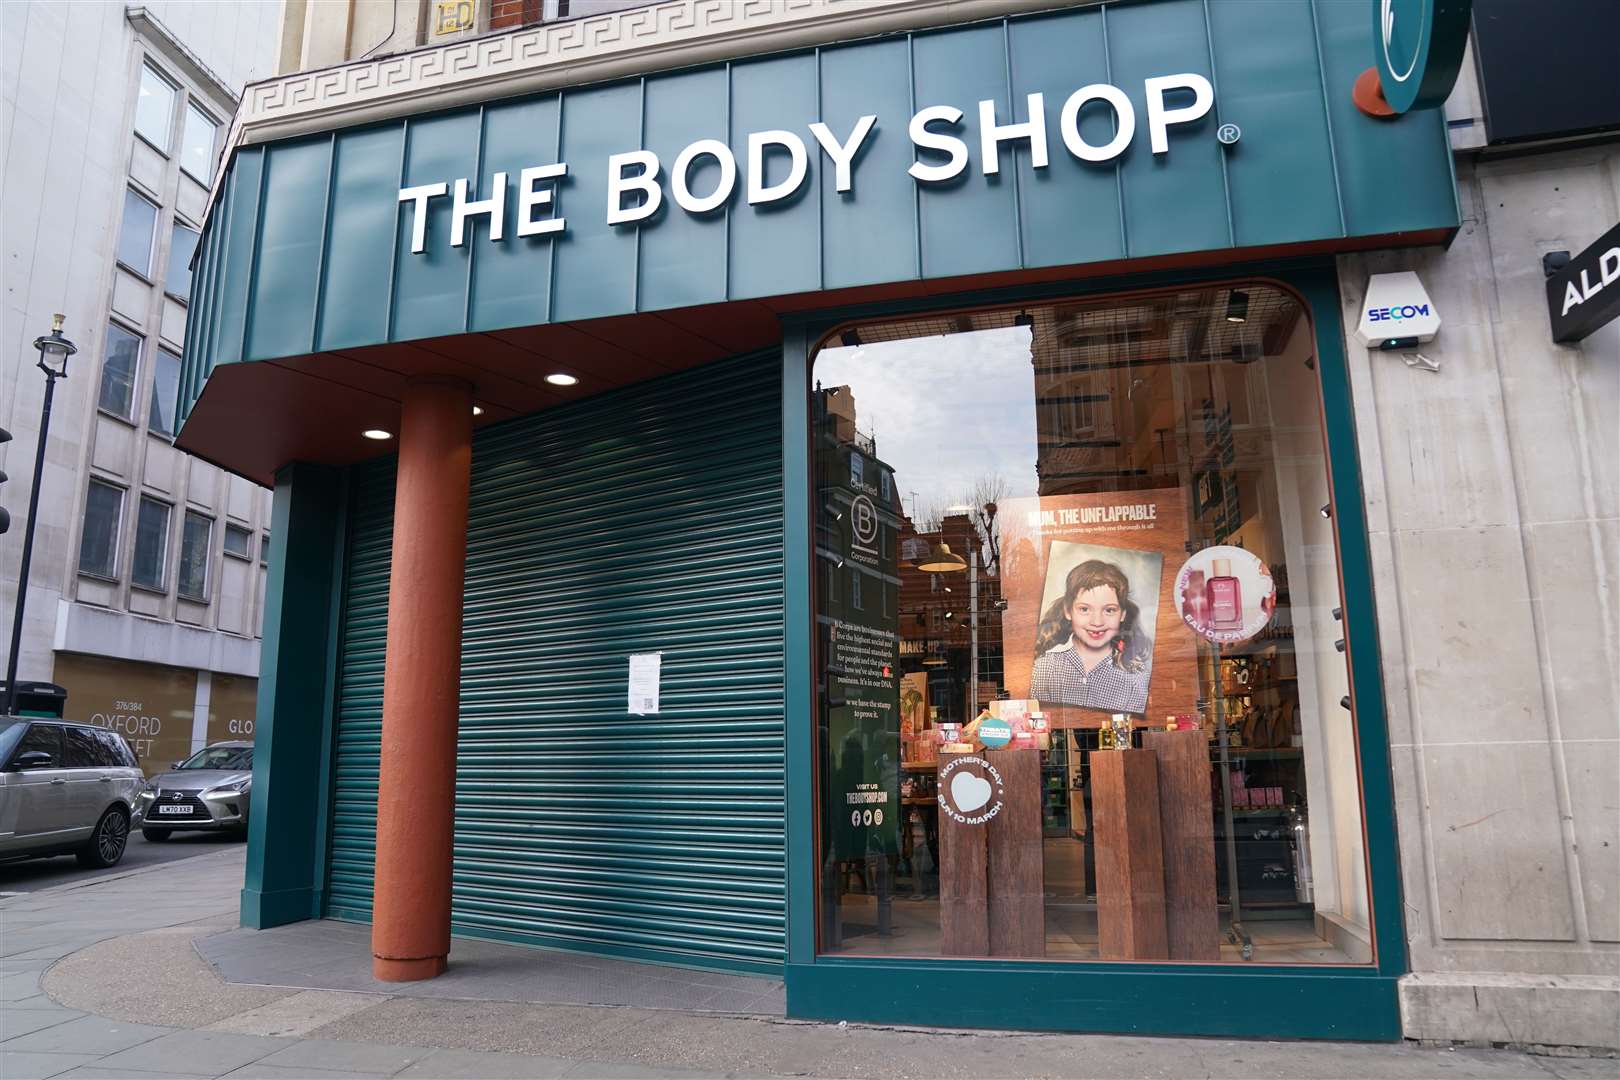 The Body Shop’s UK business was put into administration earlier this year (Lucy North/PA)